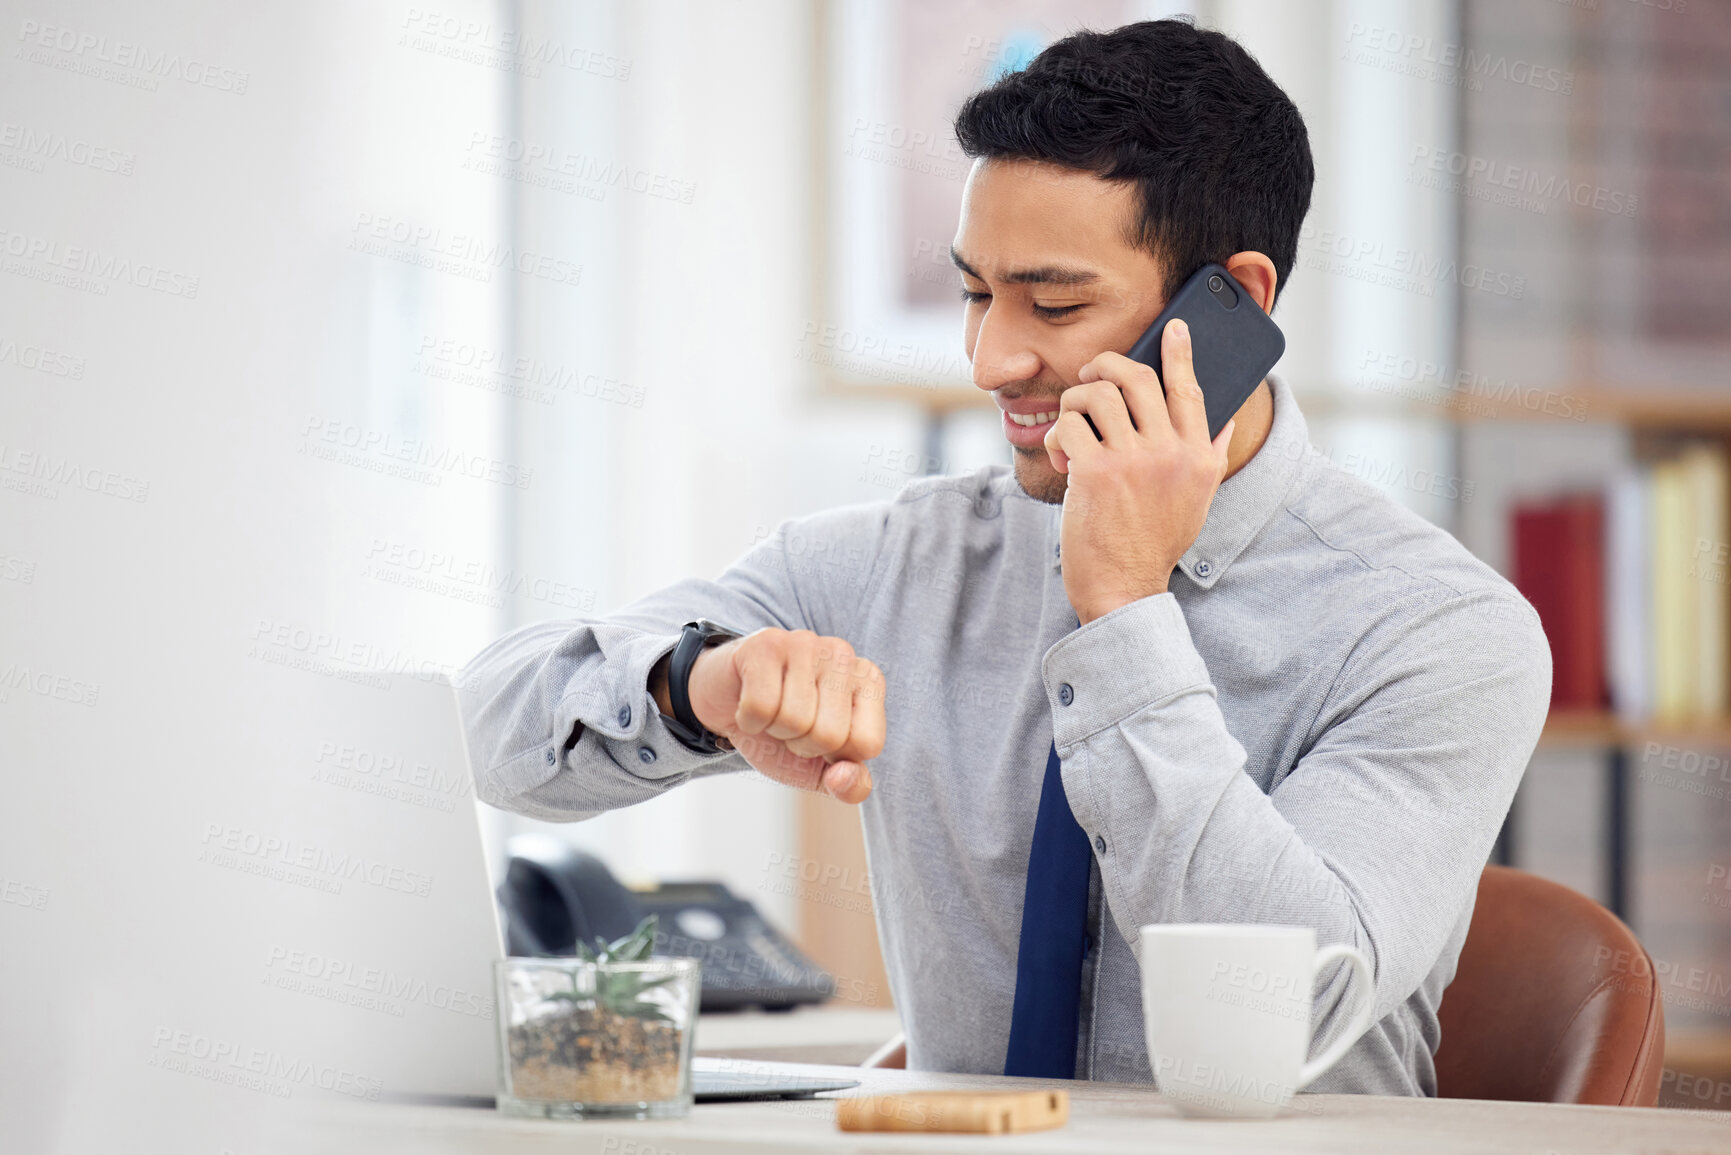 Buy stock photo Mixed race businessman on a call using a phone and checking the time on his watch while sitting in an office at work. Hispanic male businessperson talking on the phone while looking the time at work